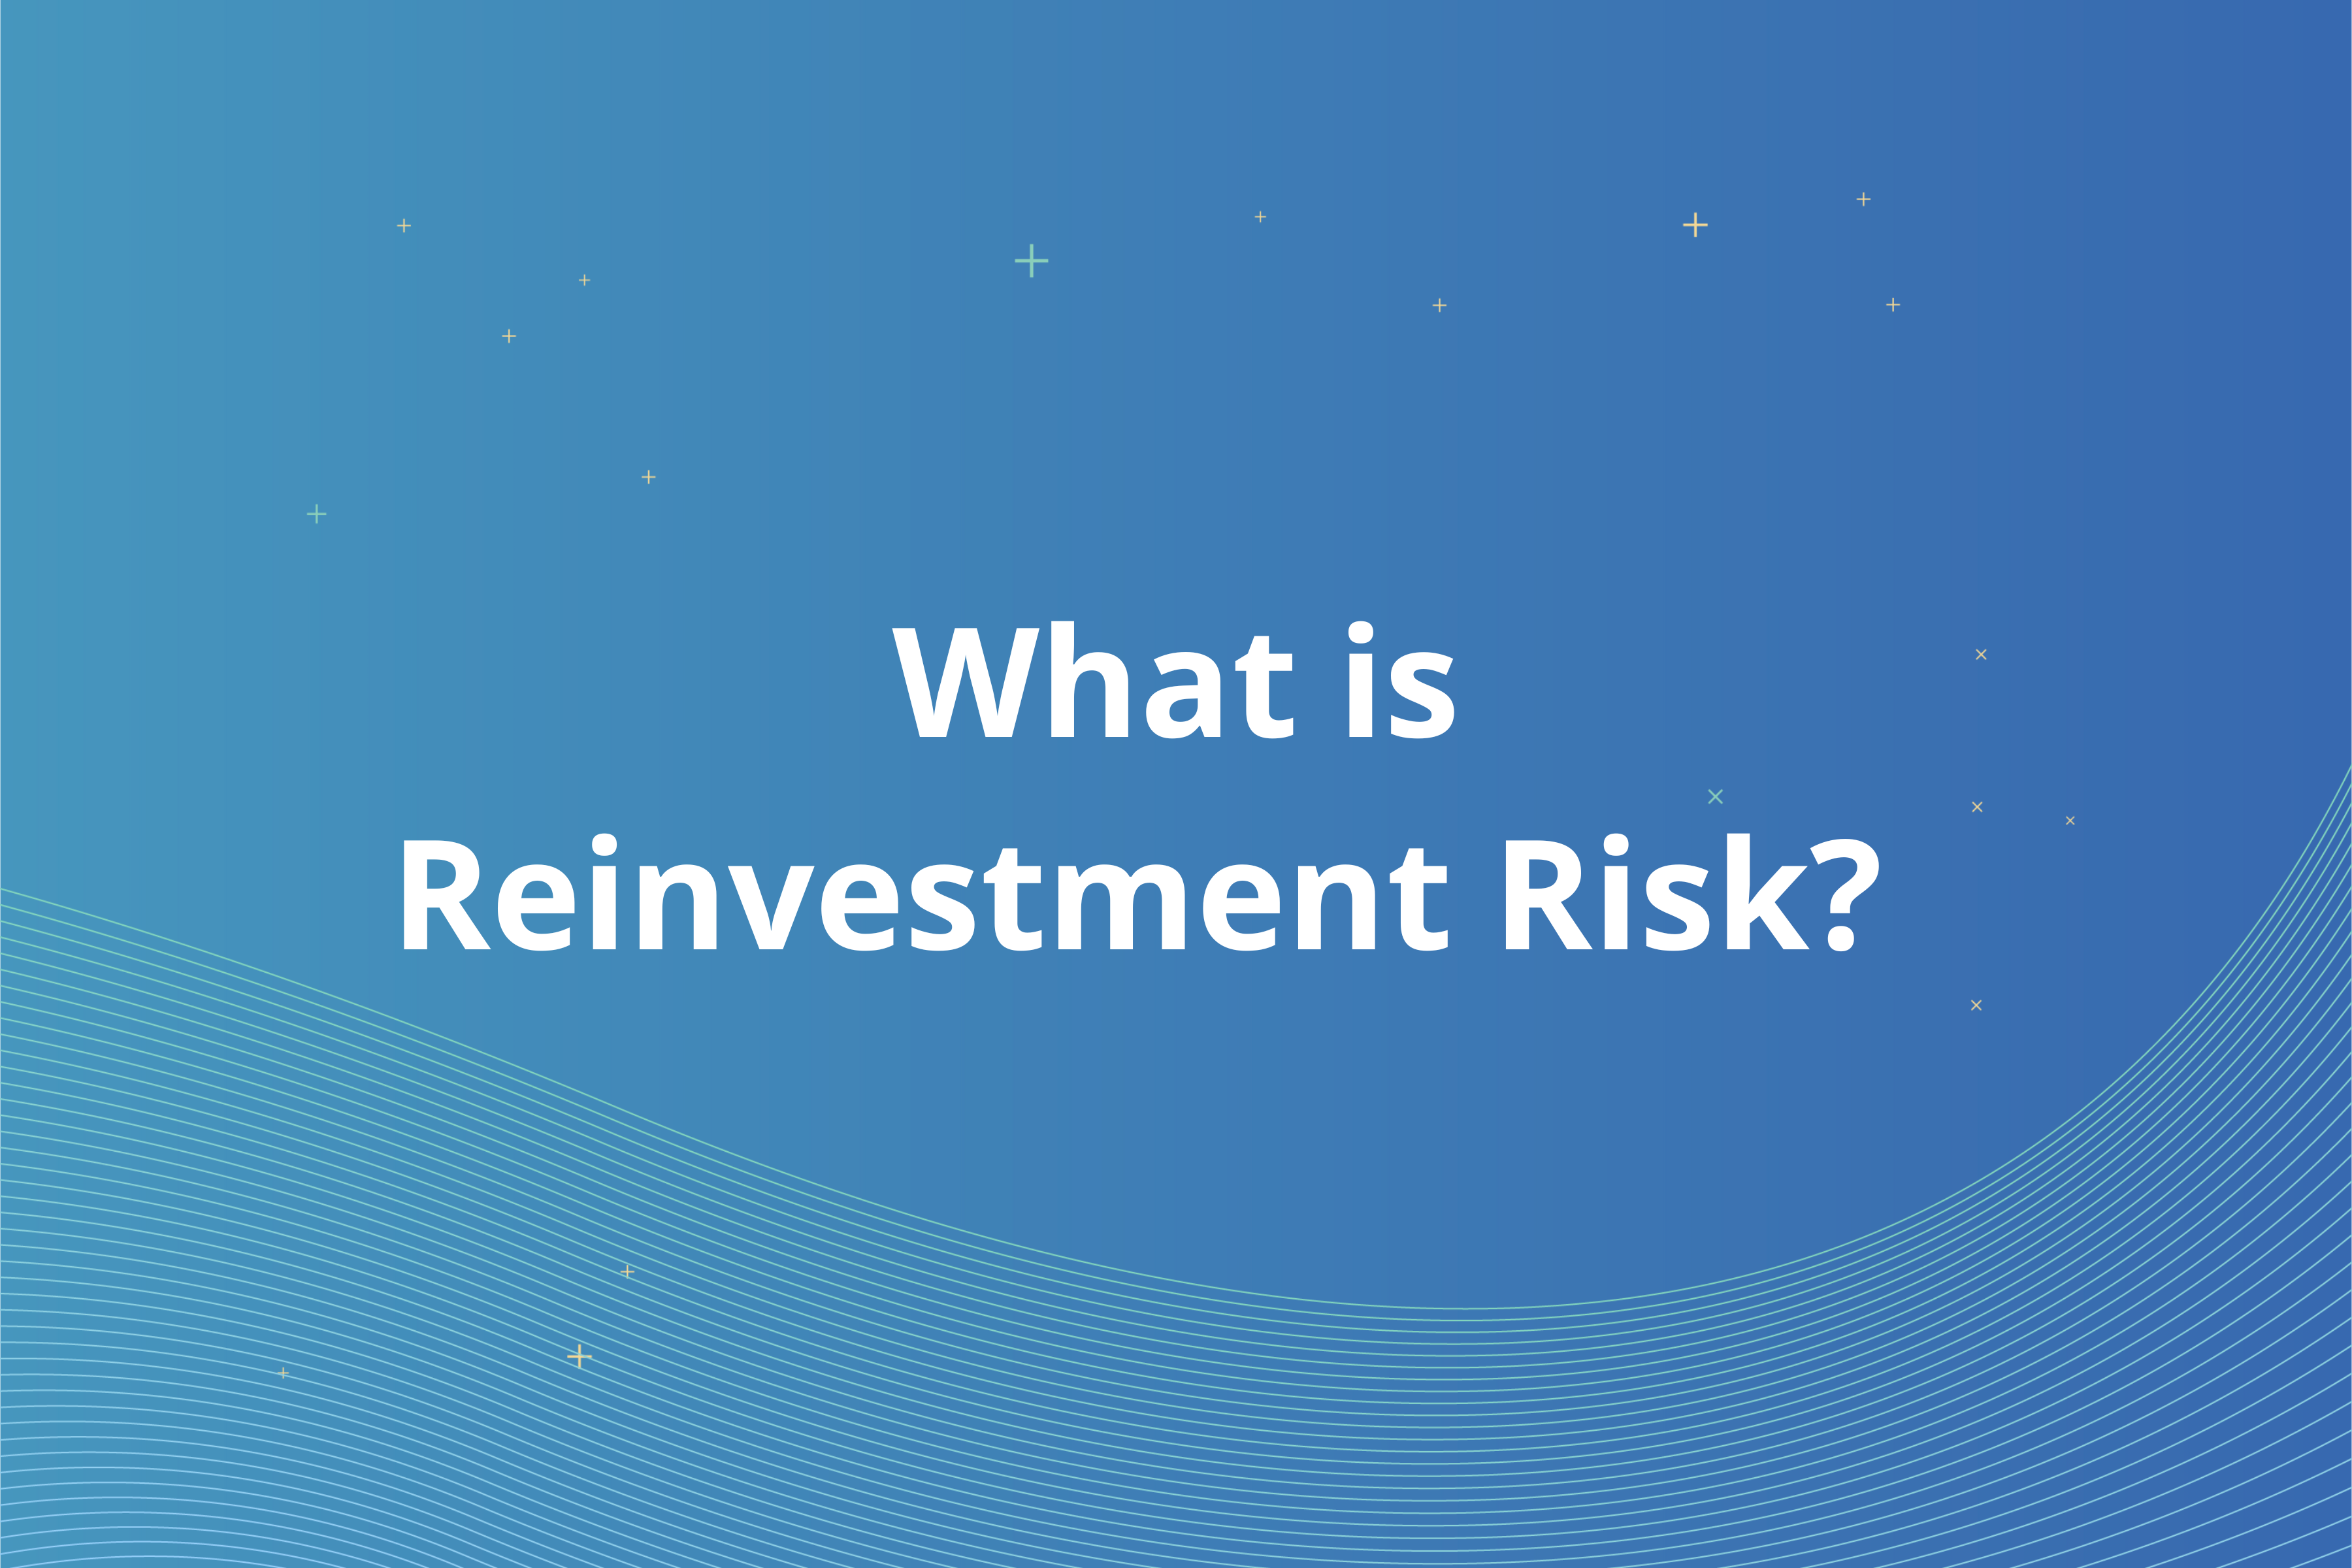 What is Reinvestment Risk?